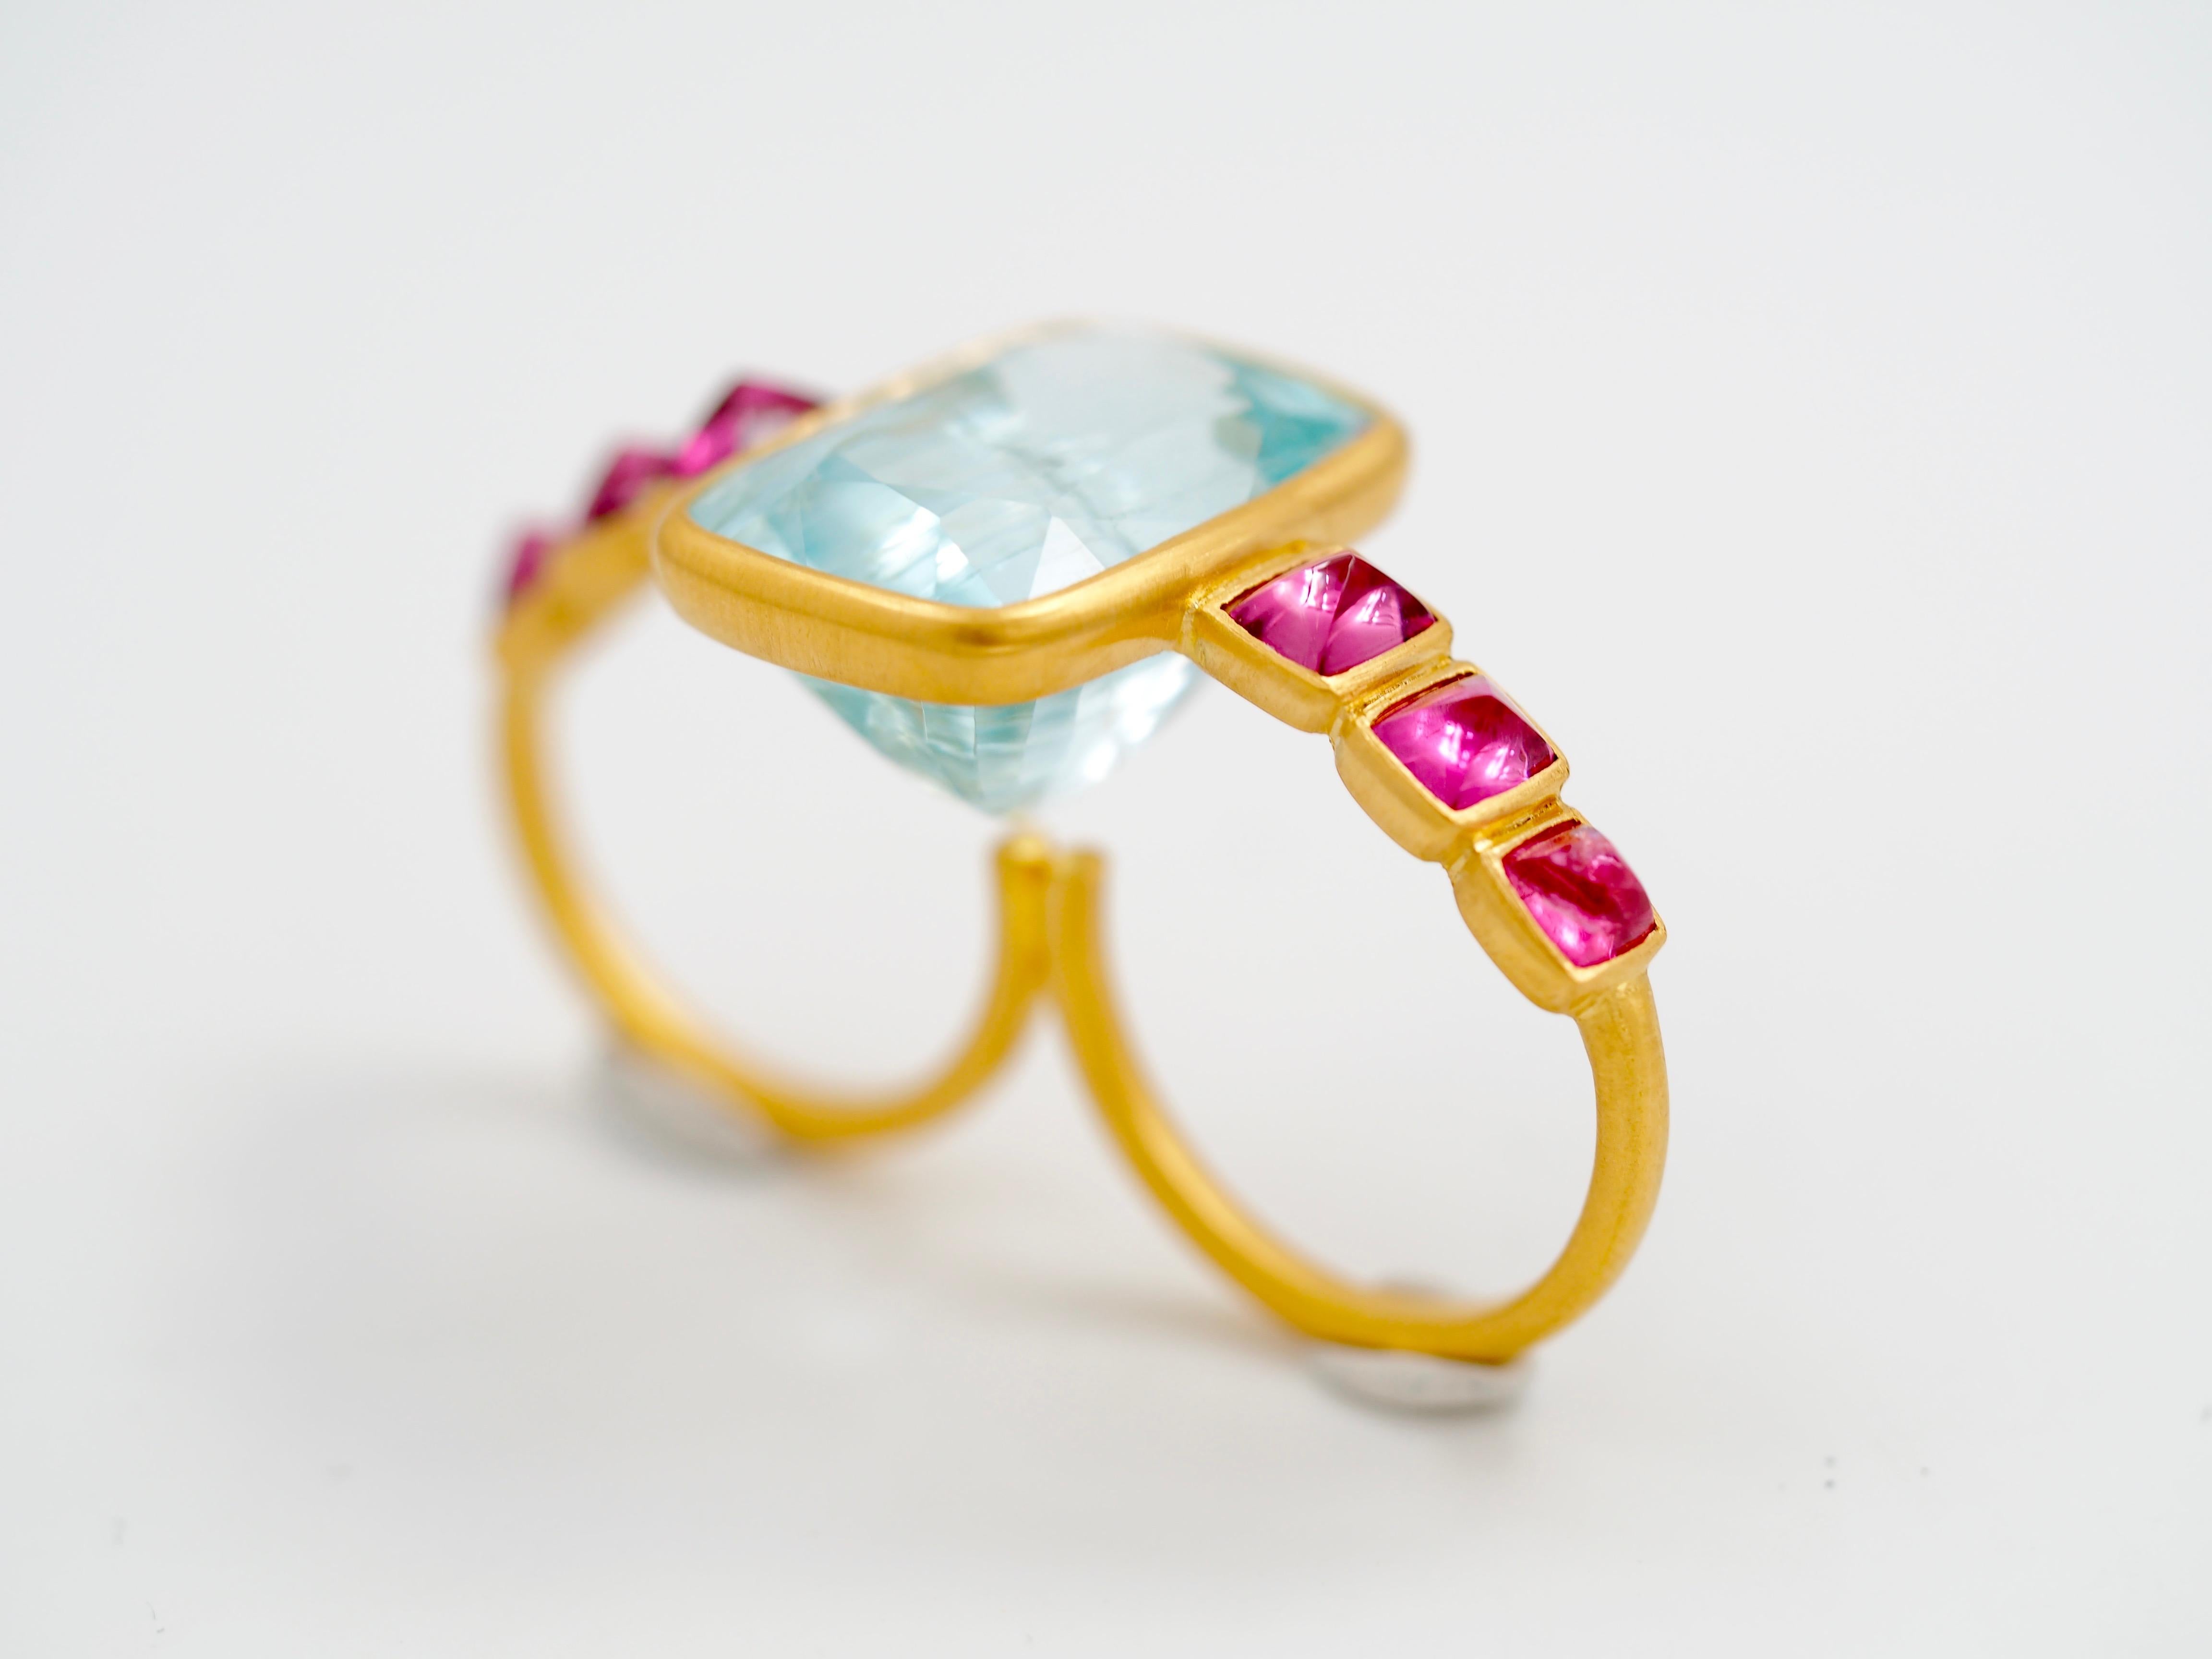 This two-fingers ring by Scrives is composed of a large and deep aquamarine of 19.8cts (origin: Myanmar, no treatment) and of 6 sugarloaf pink spinels set on the sides (total weight: 3.65cts, origin: Myanmar). The aquamarine exhibits eye visible